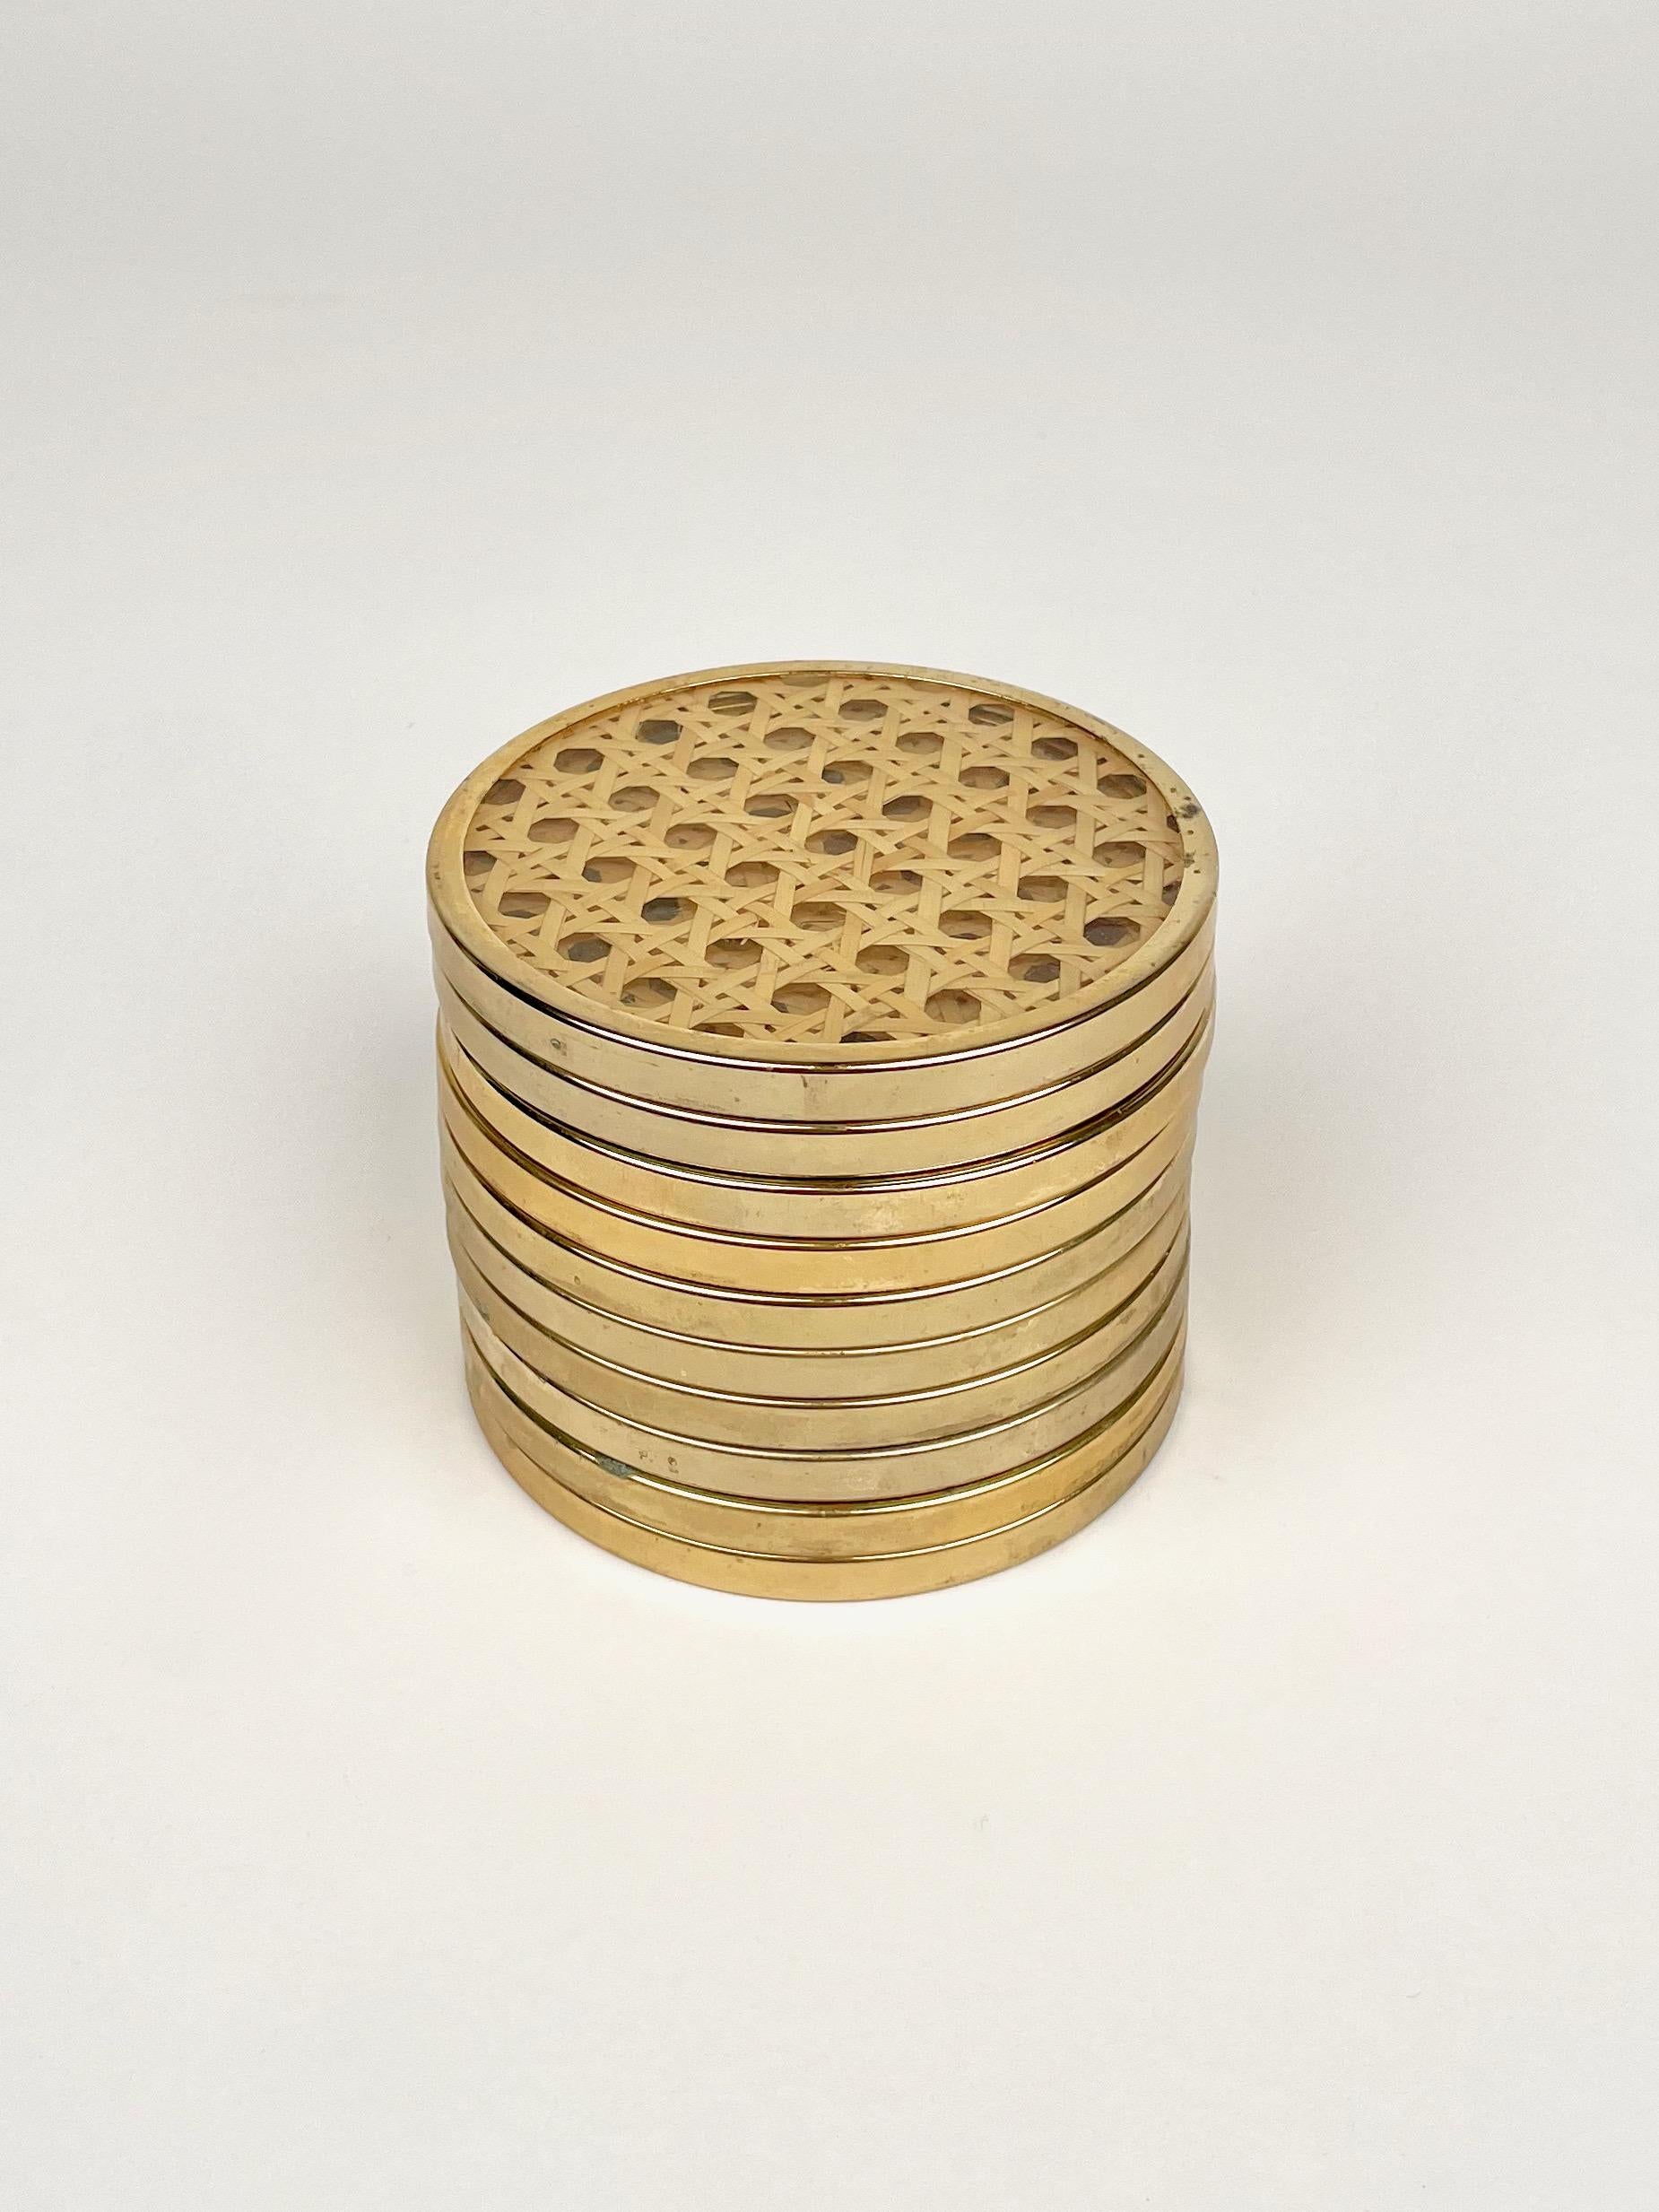 12 Barware Coasters Lucite, Rattan and Brass Christian Dior Style, Italy 1970s 3